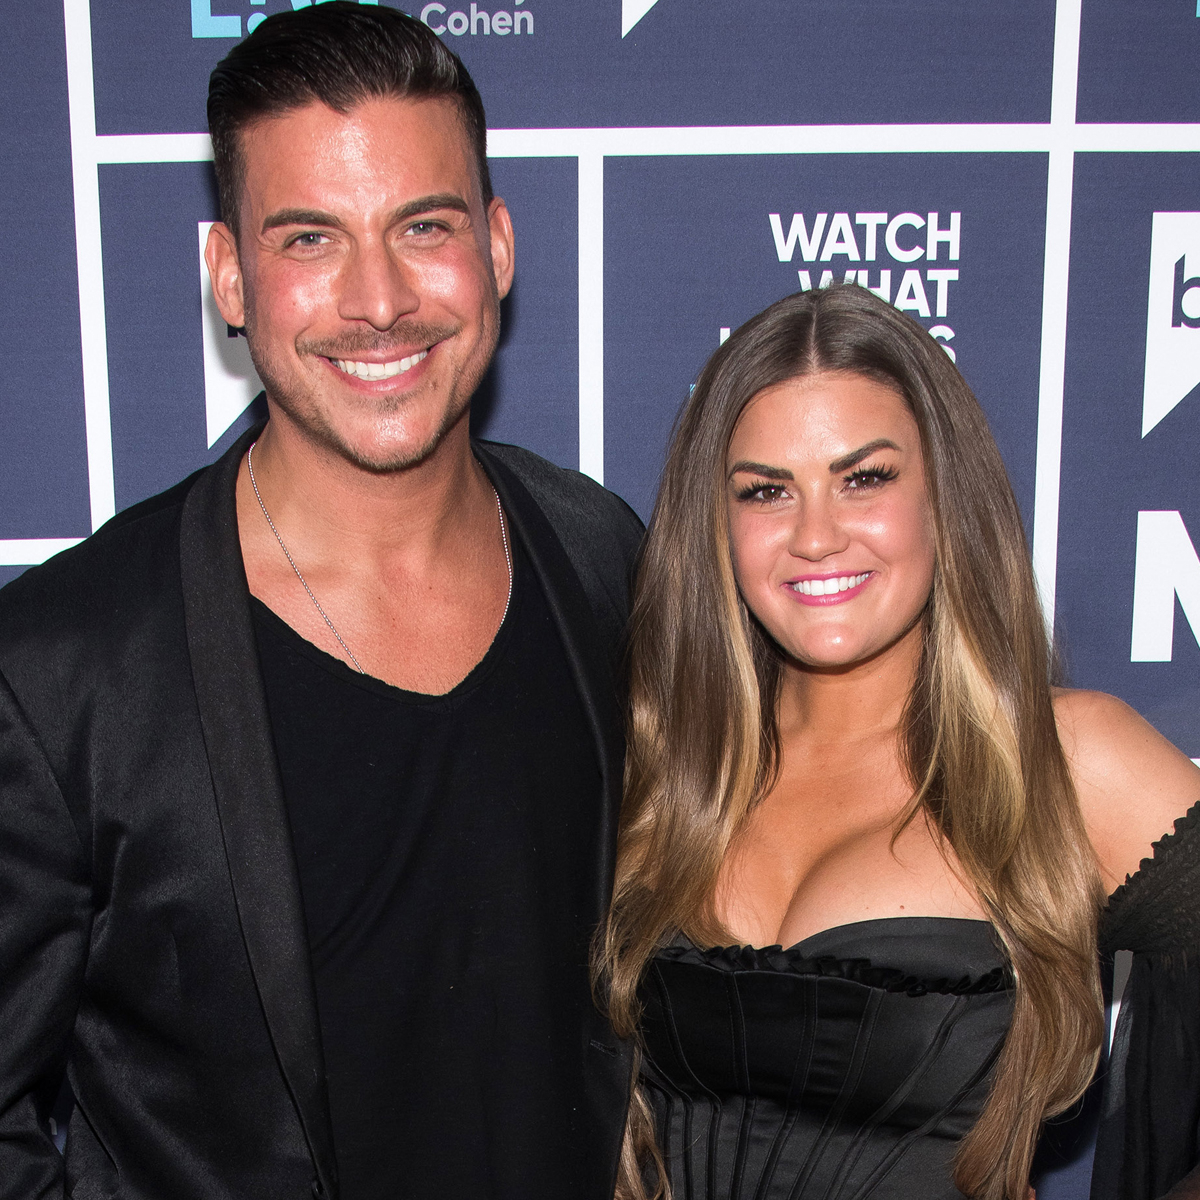 Jax Taylor and Brittany Cartwright Attend White House Correspondents Dinner Amid Separation: A Surprising Public Appearance